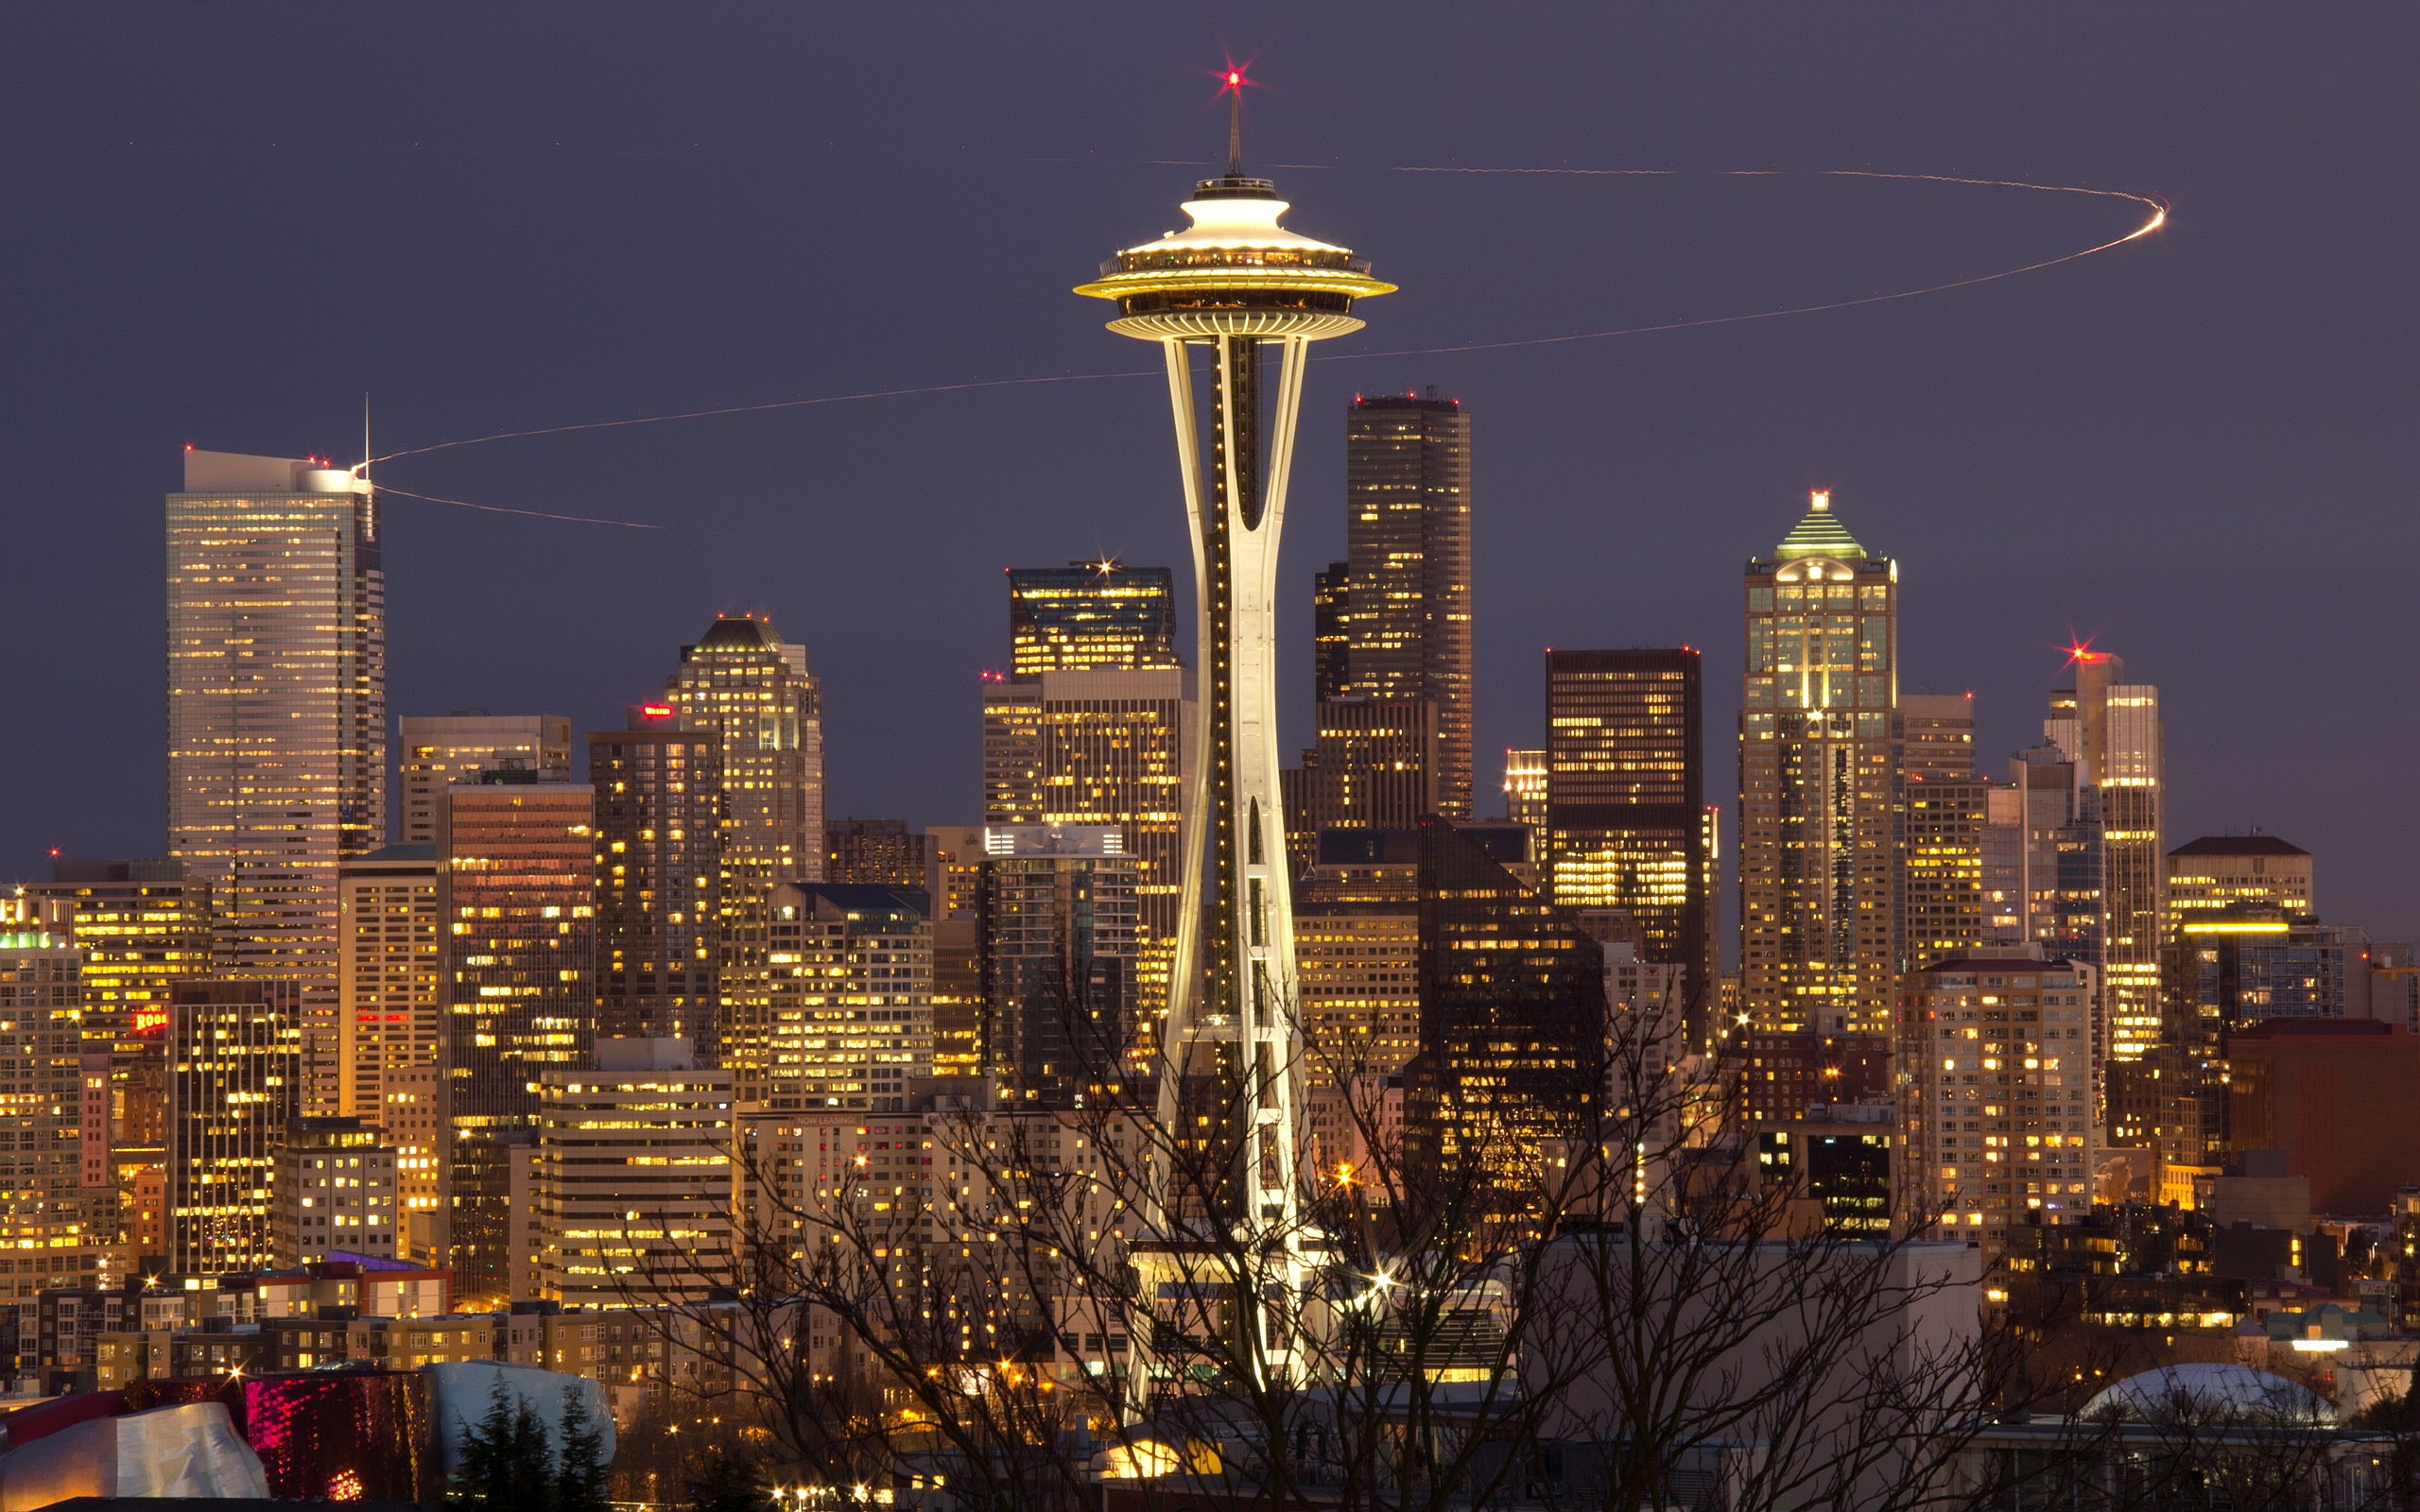 Seattle Night Skyline Wallpaper Pictures Photos Image